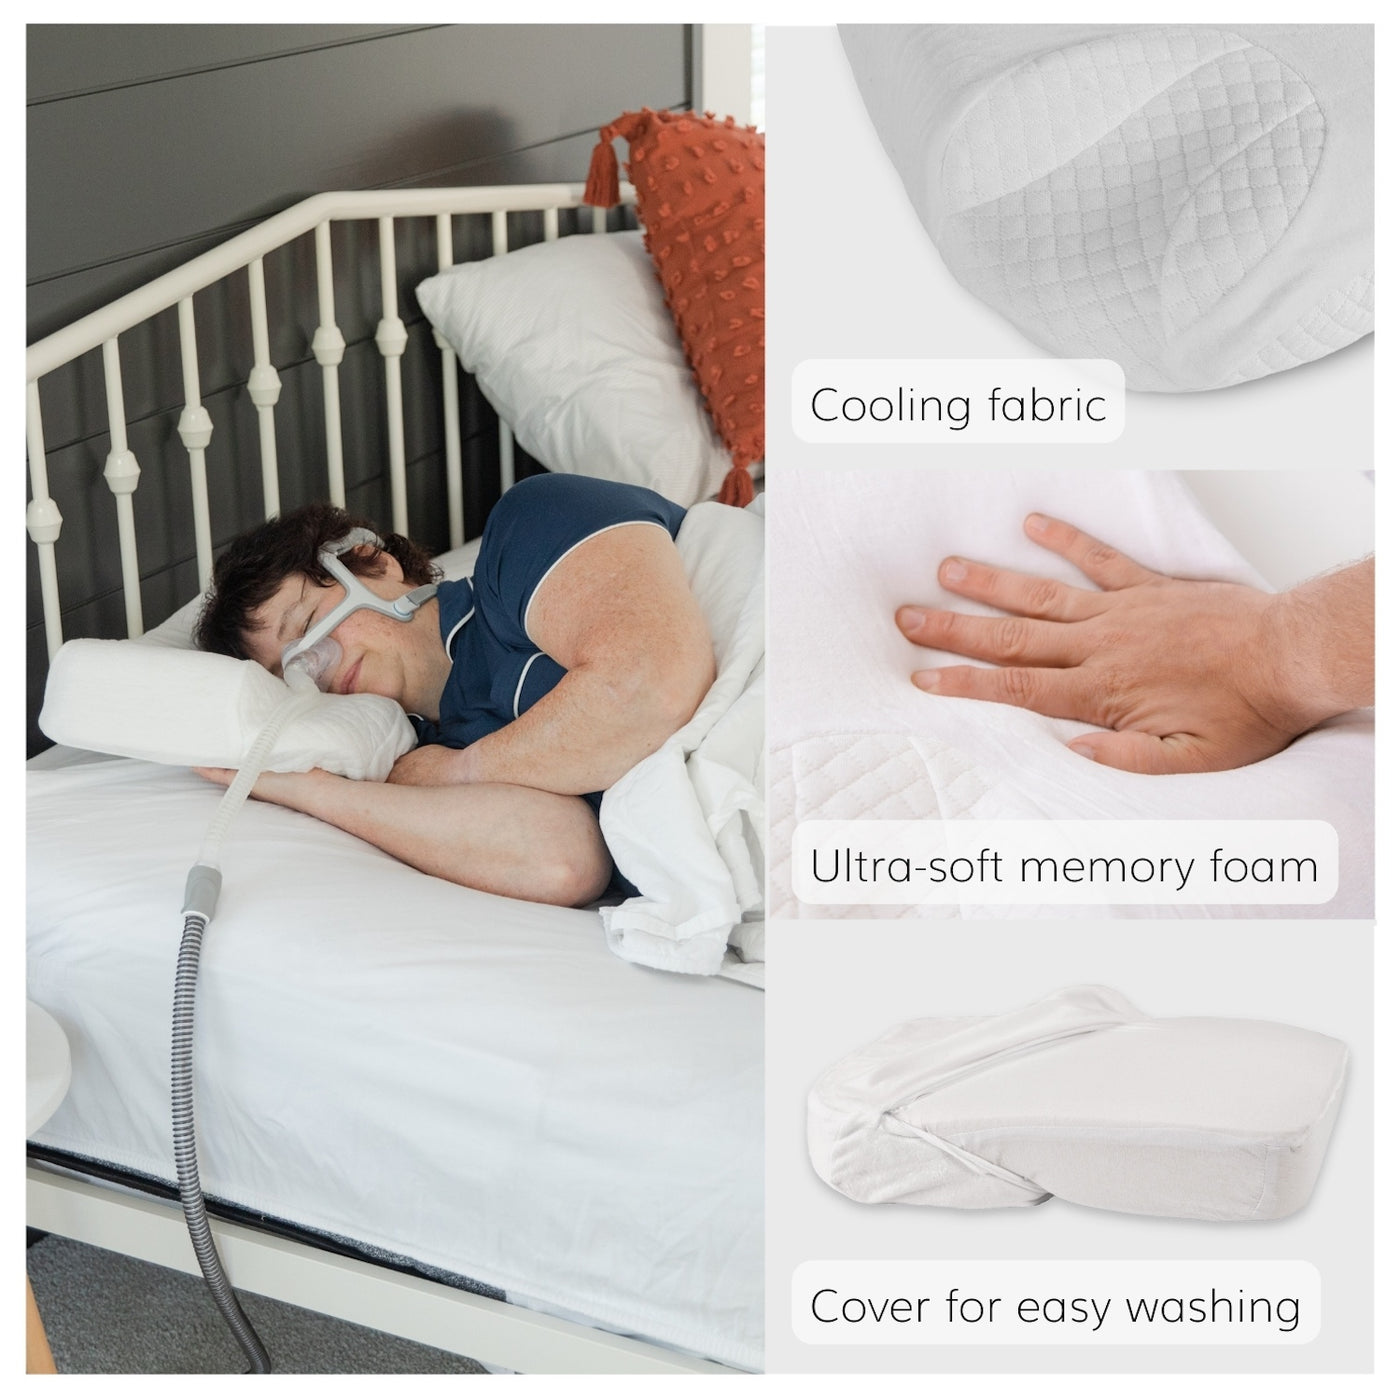 Our memory foam CPAP pillow has a machine washable cooling cover for easy washing